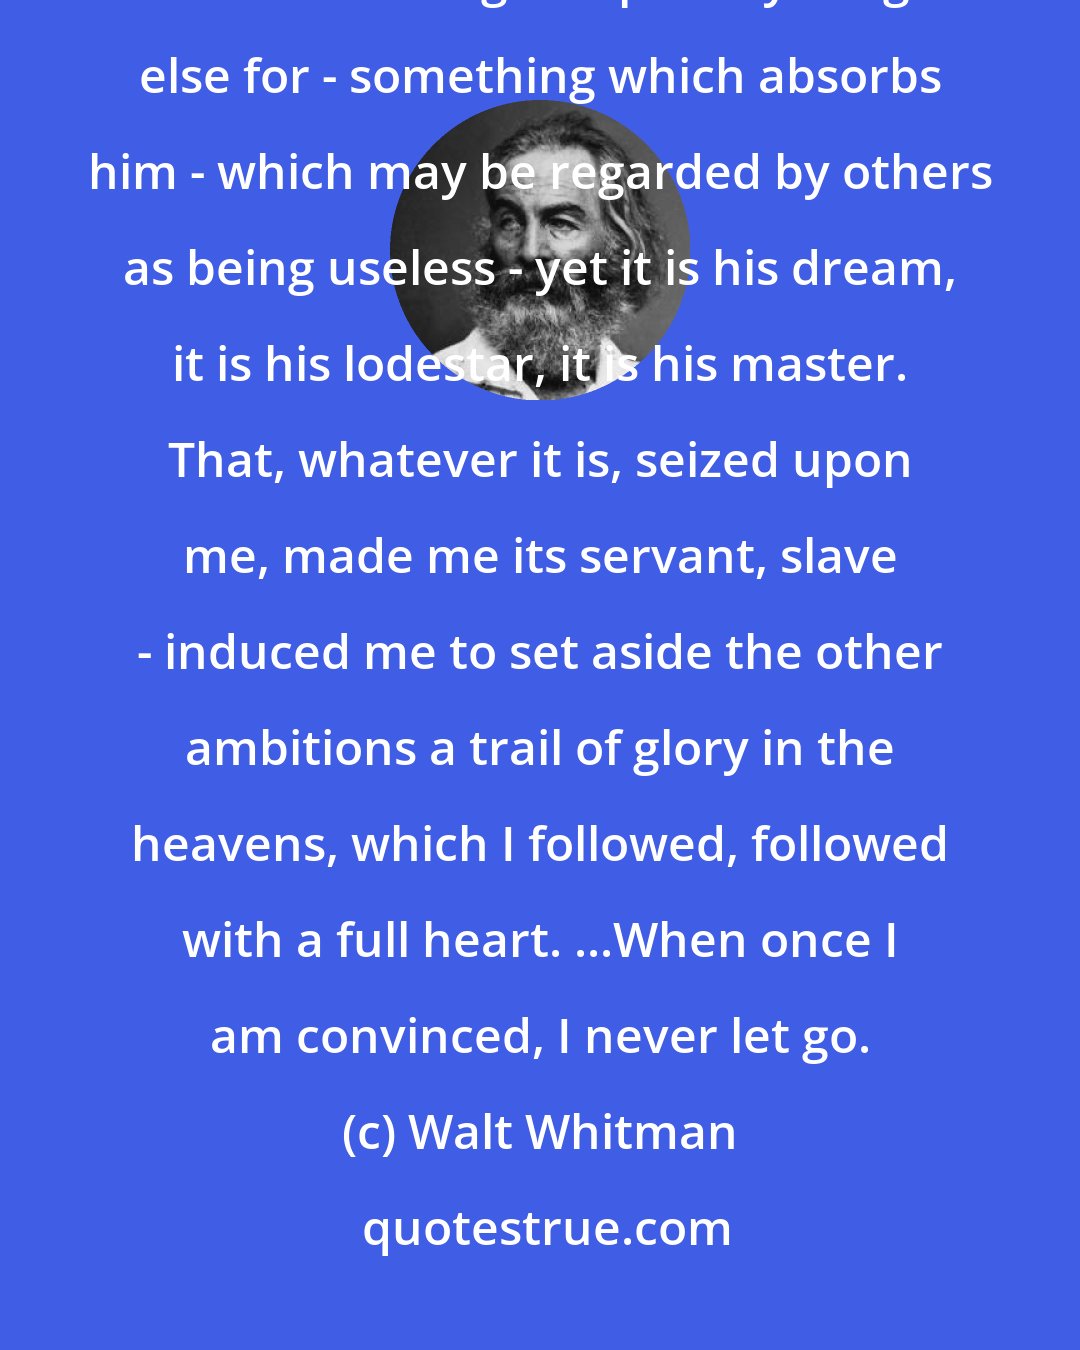 Walt Whitman: Well, every man has a religion; has something in heaven or earth which he will give up everything else for - something which absorbs him - which may be regarded by others as being useless - yet it is his dream, it is his lodestar, it is his master. That, whatever it is, seized upon me, made me its servant, slave - induced me to set aside the other ambitions a trail of glory in the heavens, which I followed, followed with a full heart. ...When once I am convinced, I never let go.